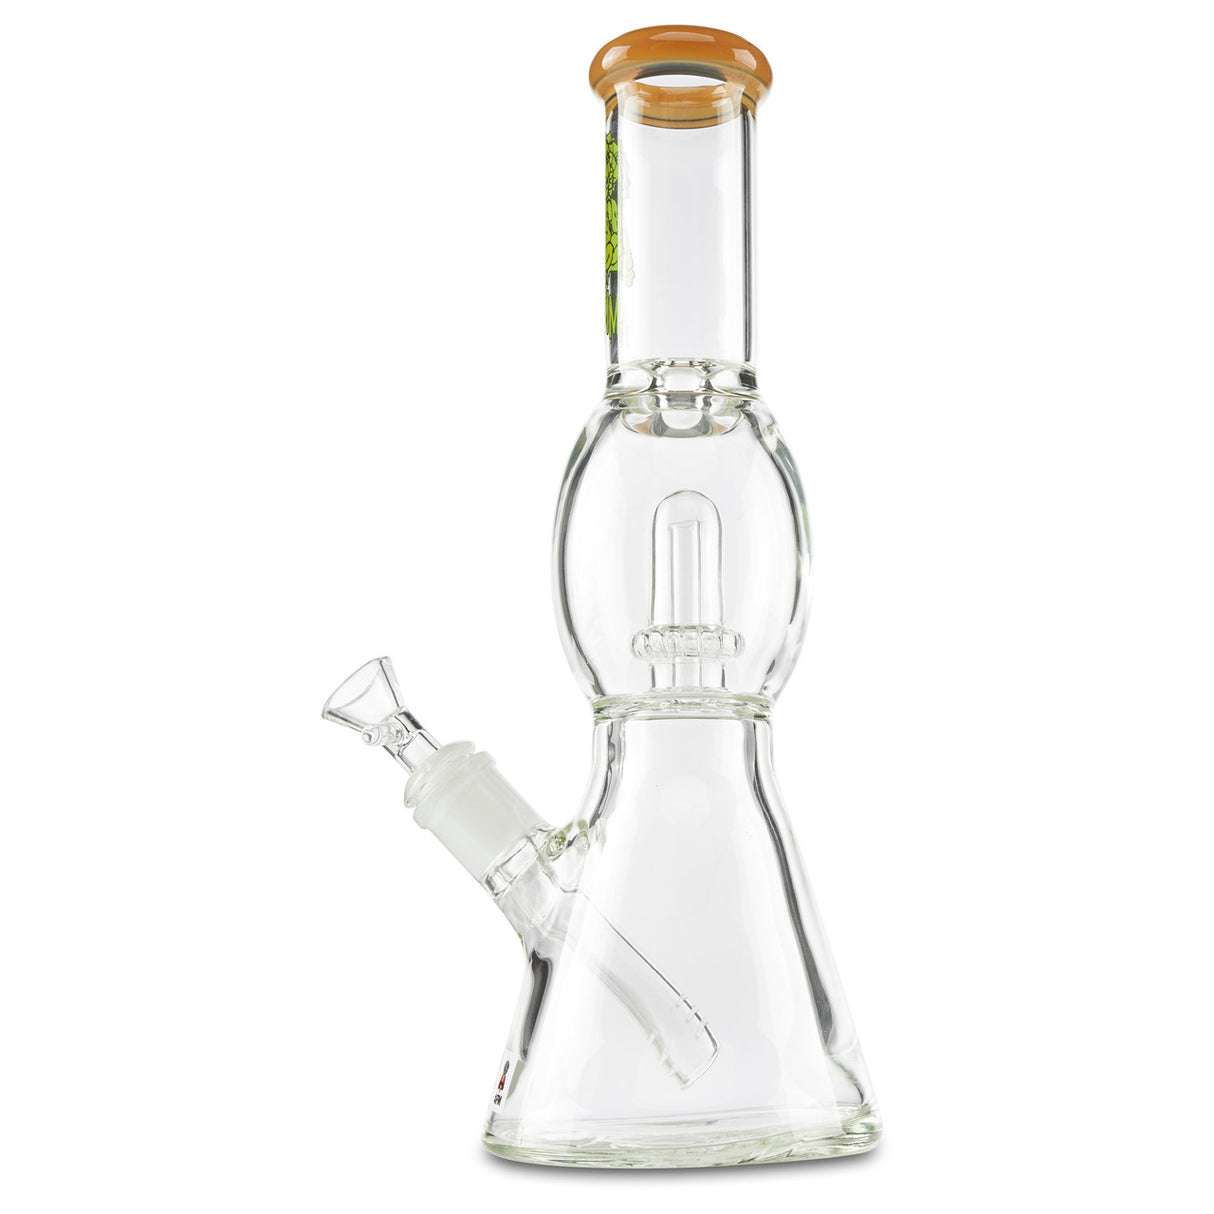 afm short yellow dry ufo perc dry herb water pipe bong for sale